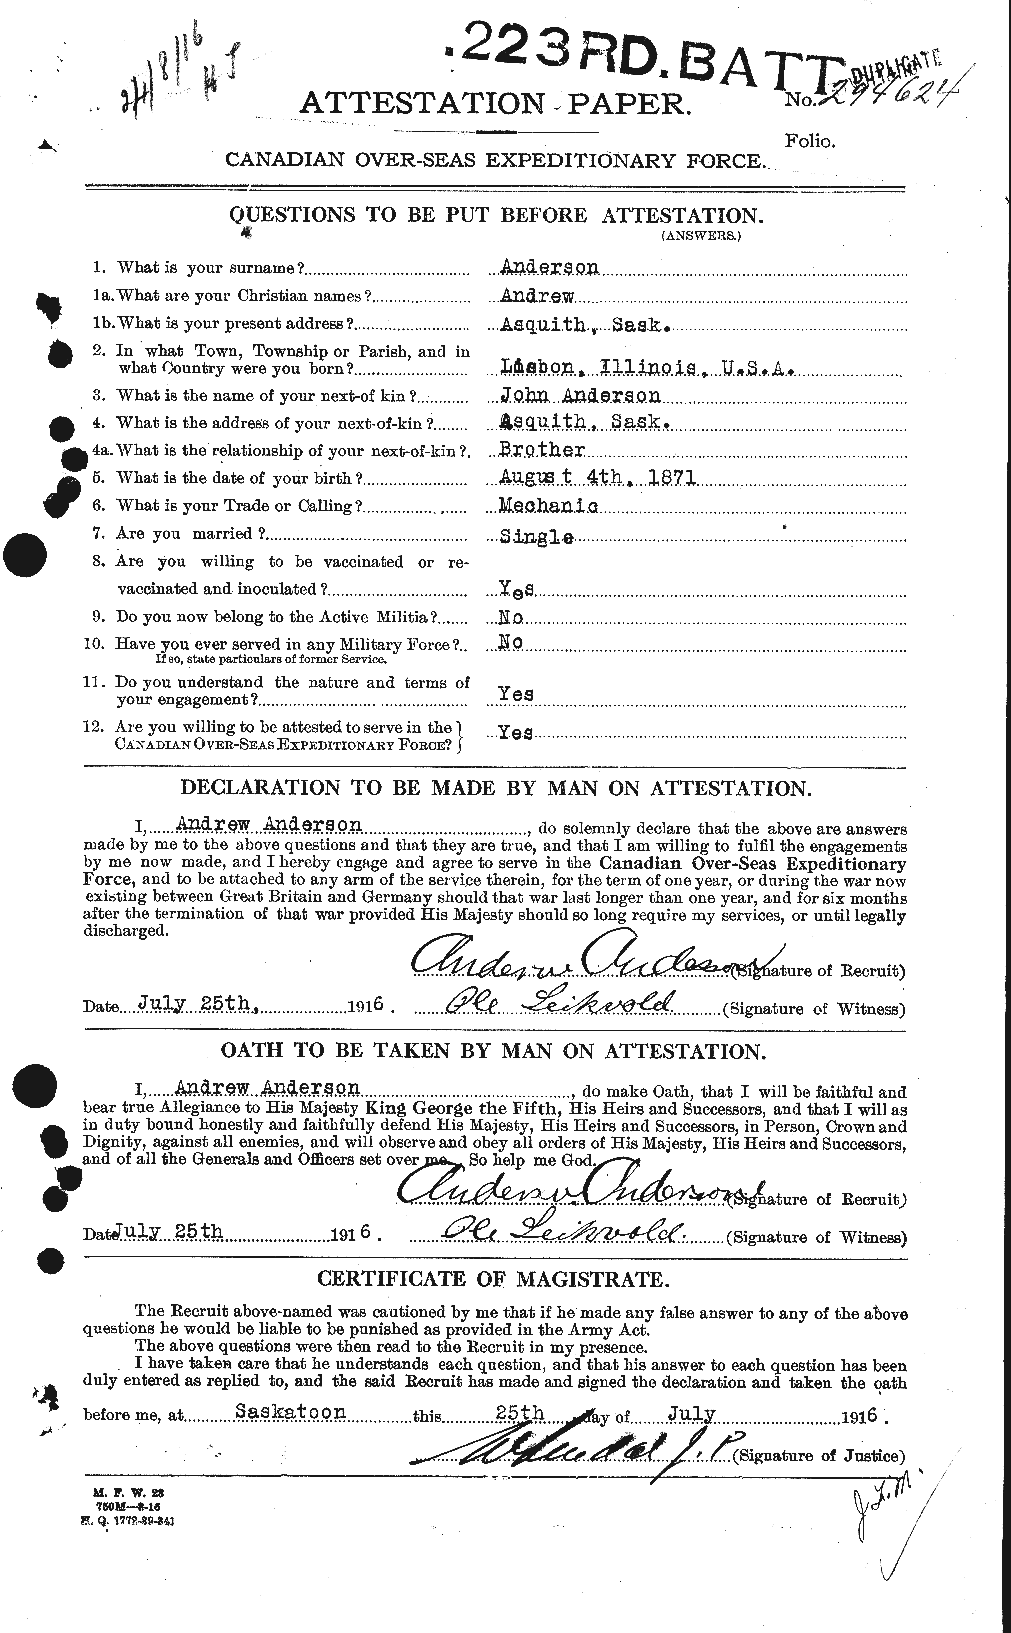 Personnel Records of the First World War - CEF 209425a